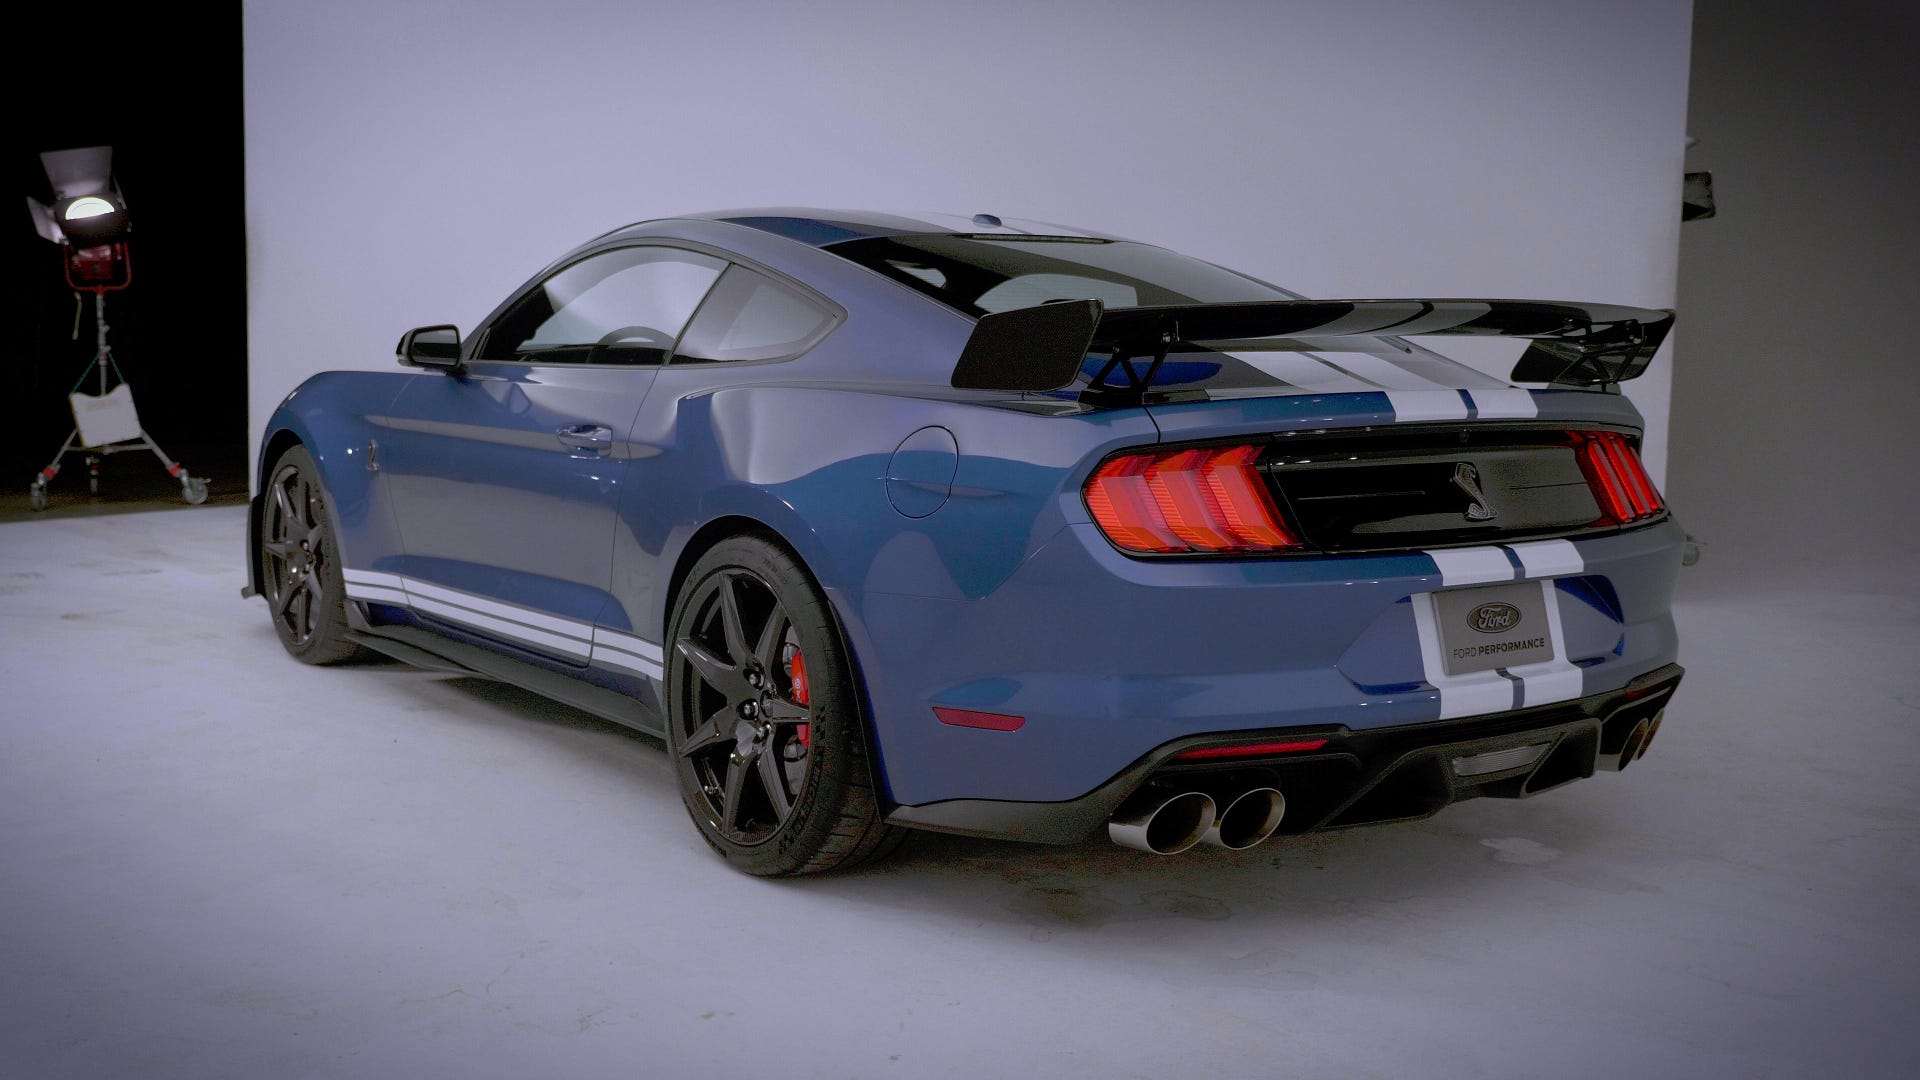 2020 Ford Mustang Shelby GT500 rear end